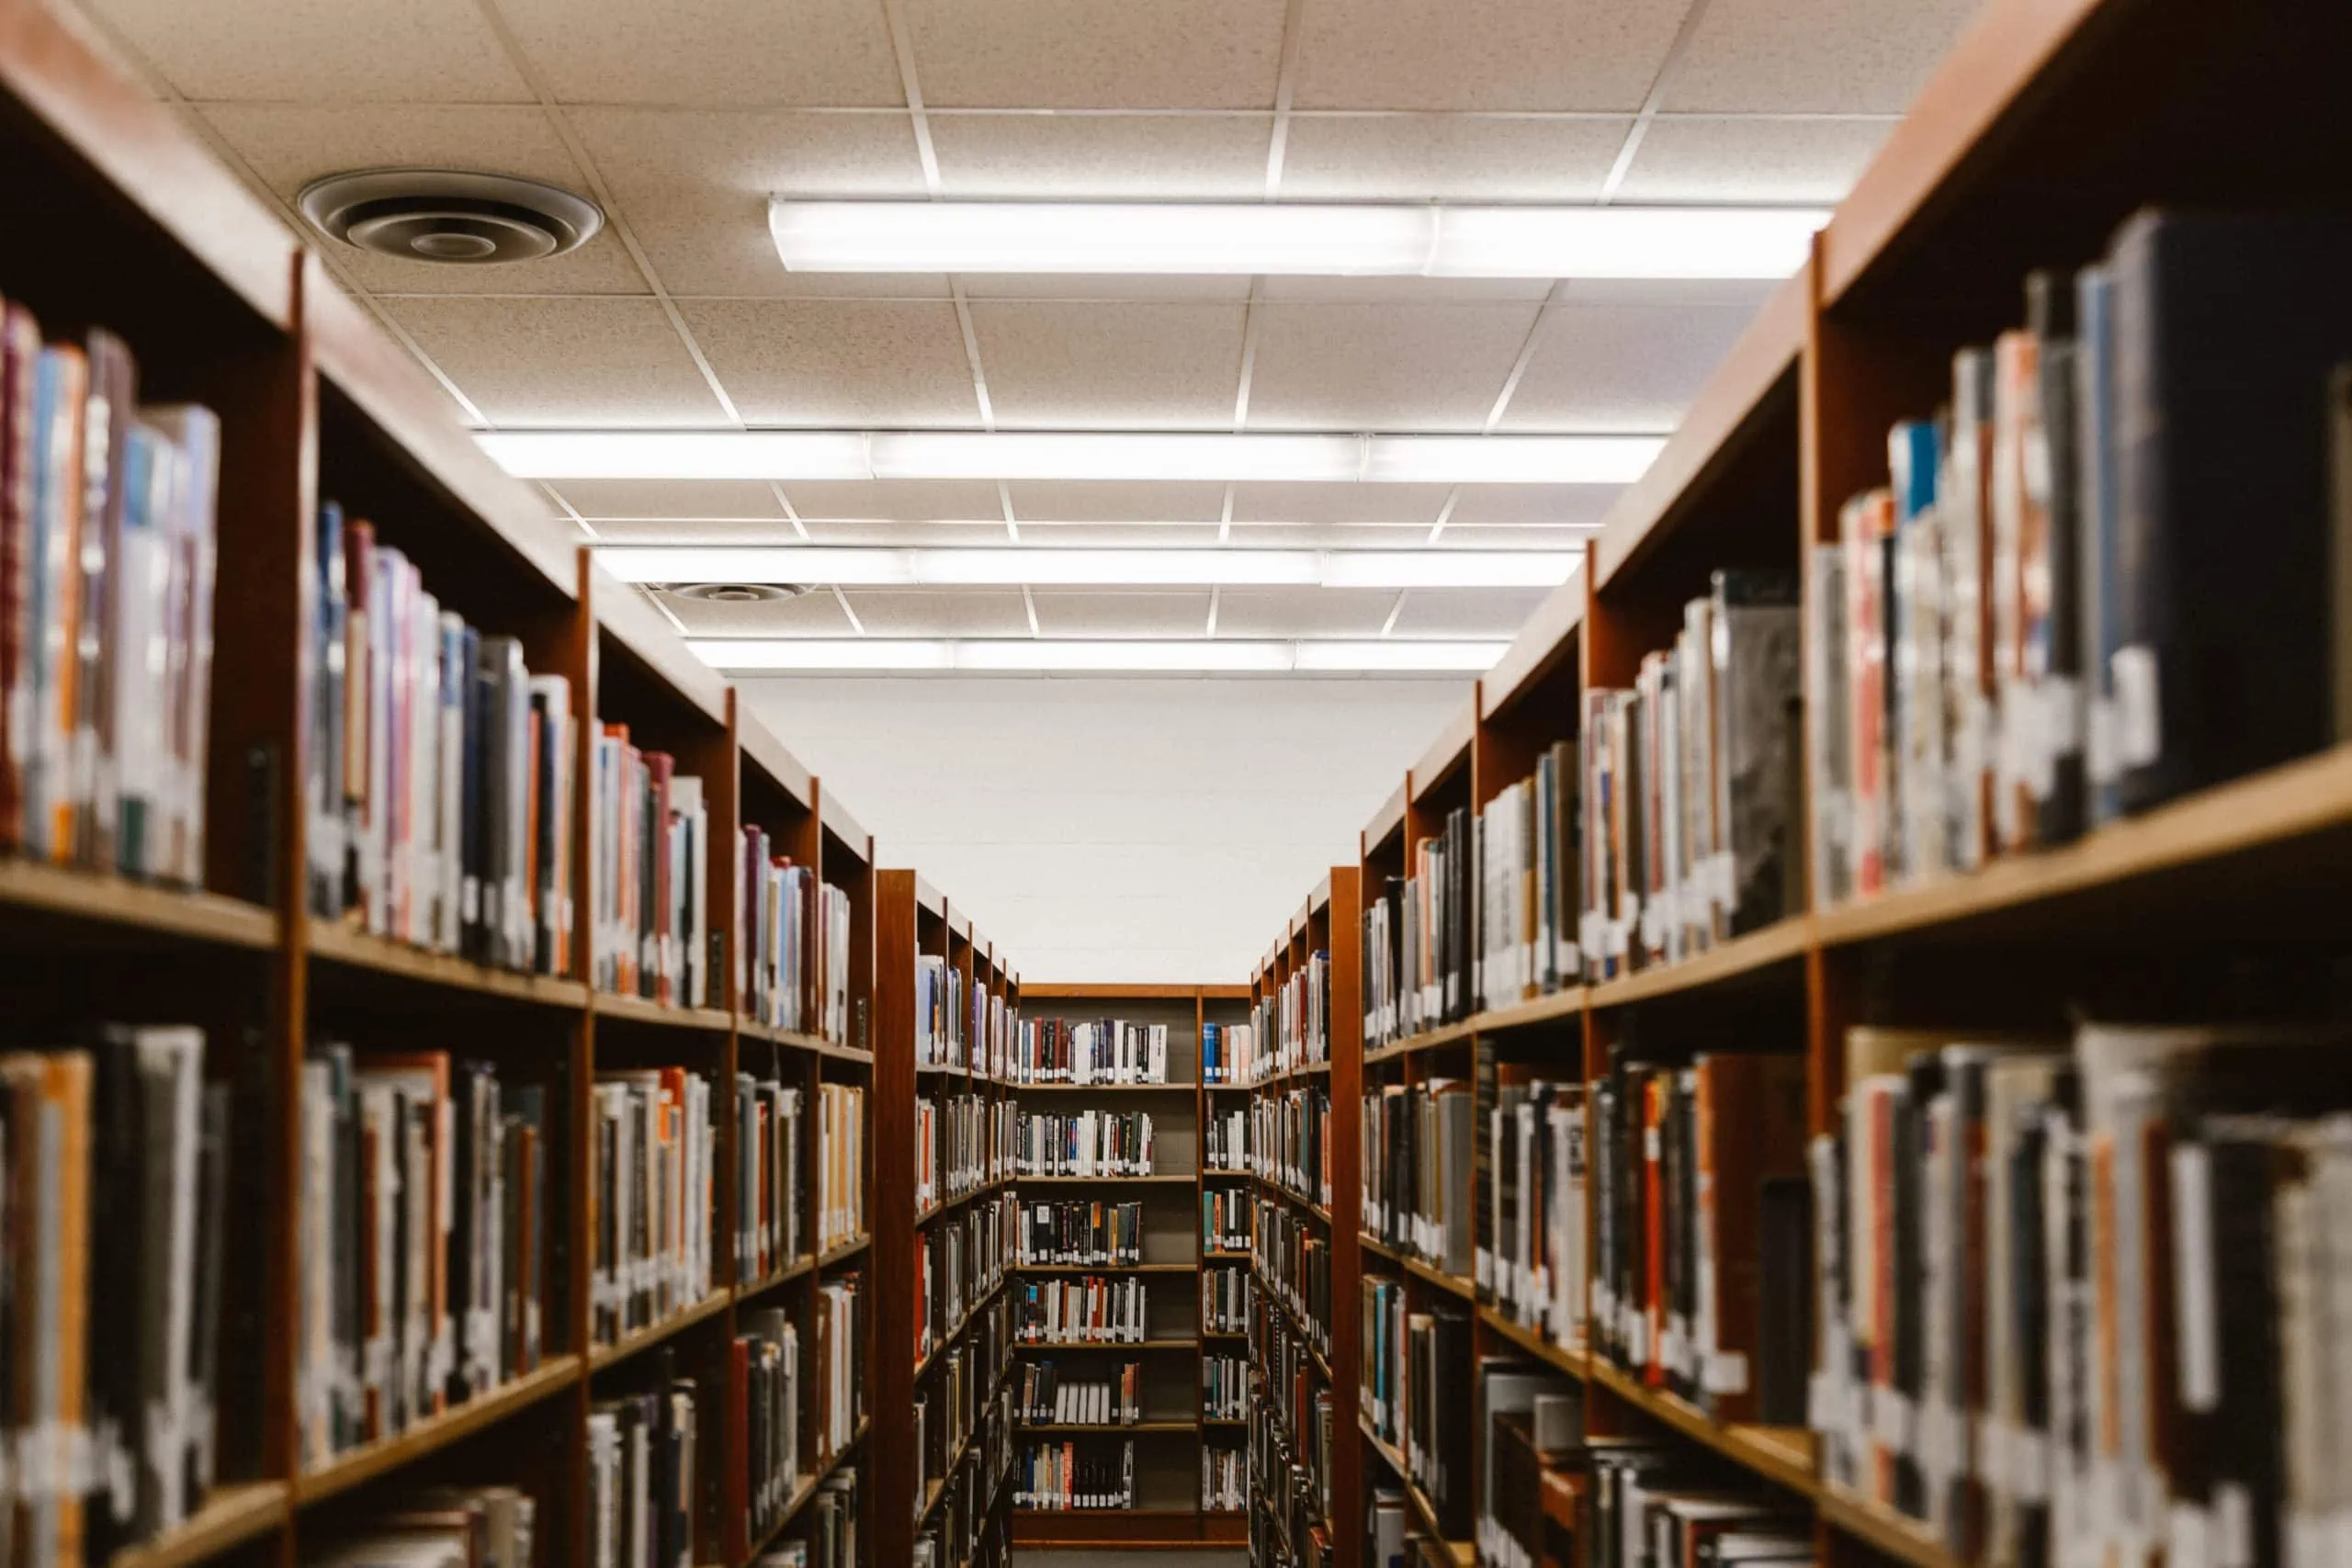 Monitoring in schools libraries to protect against threats